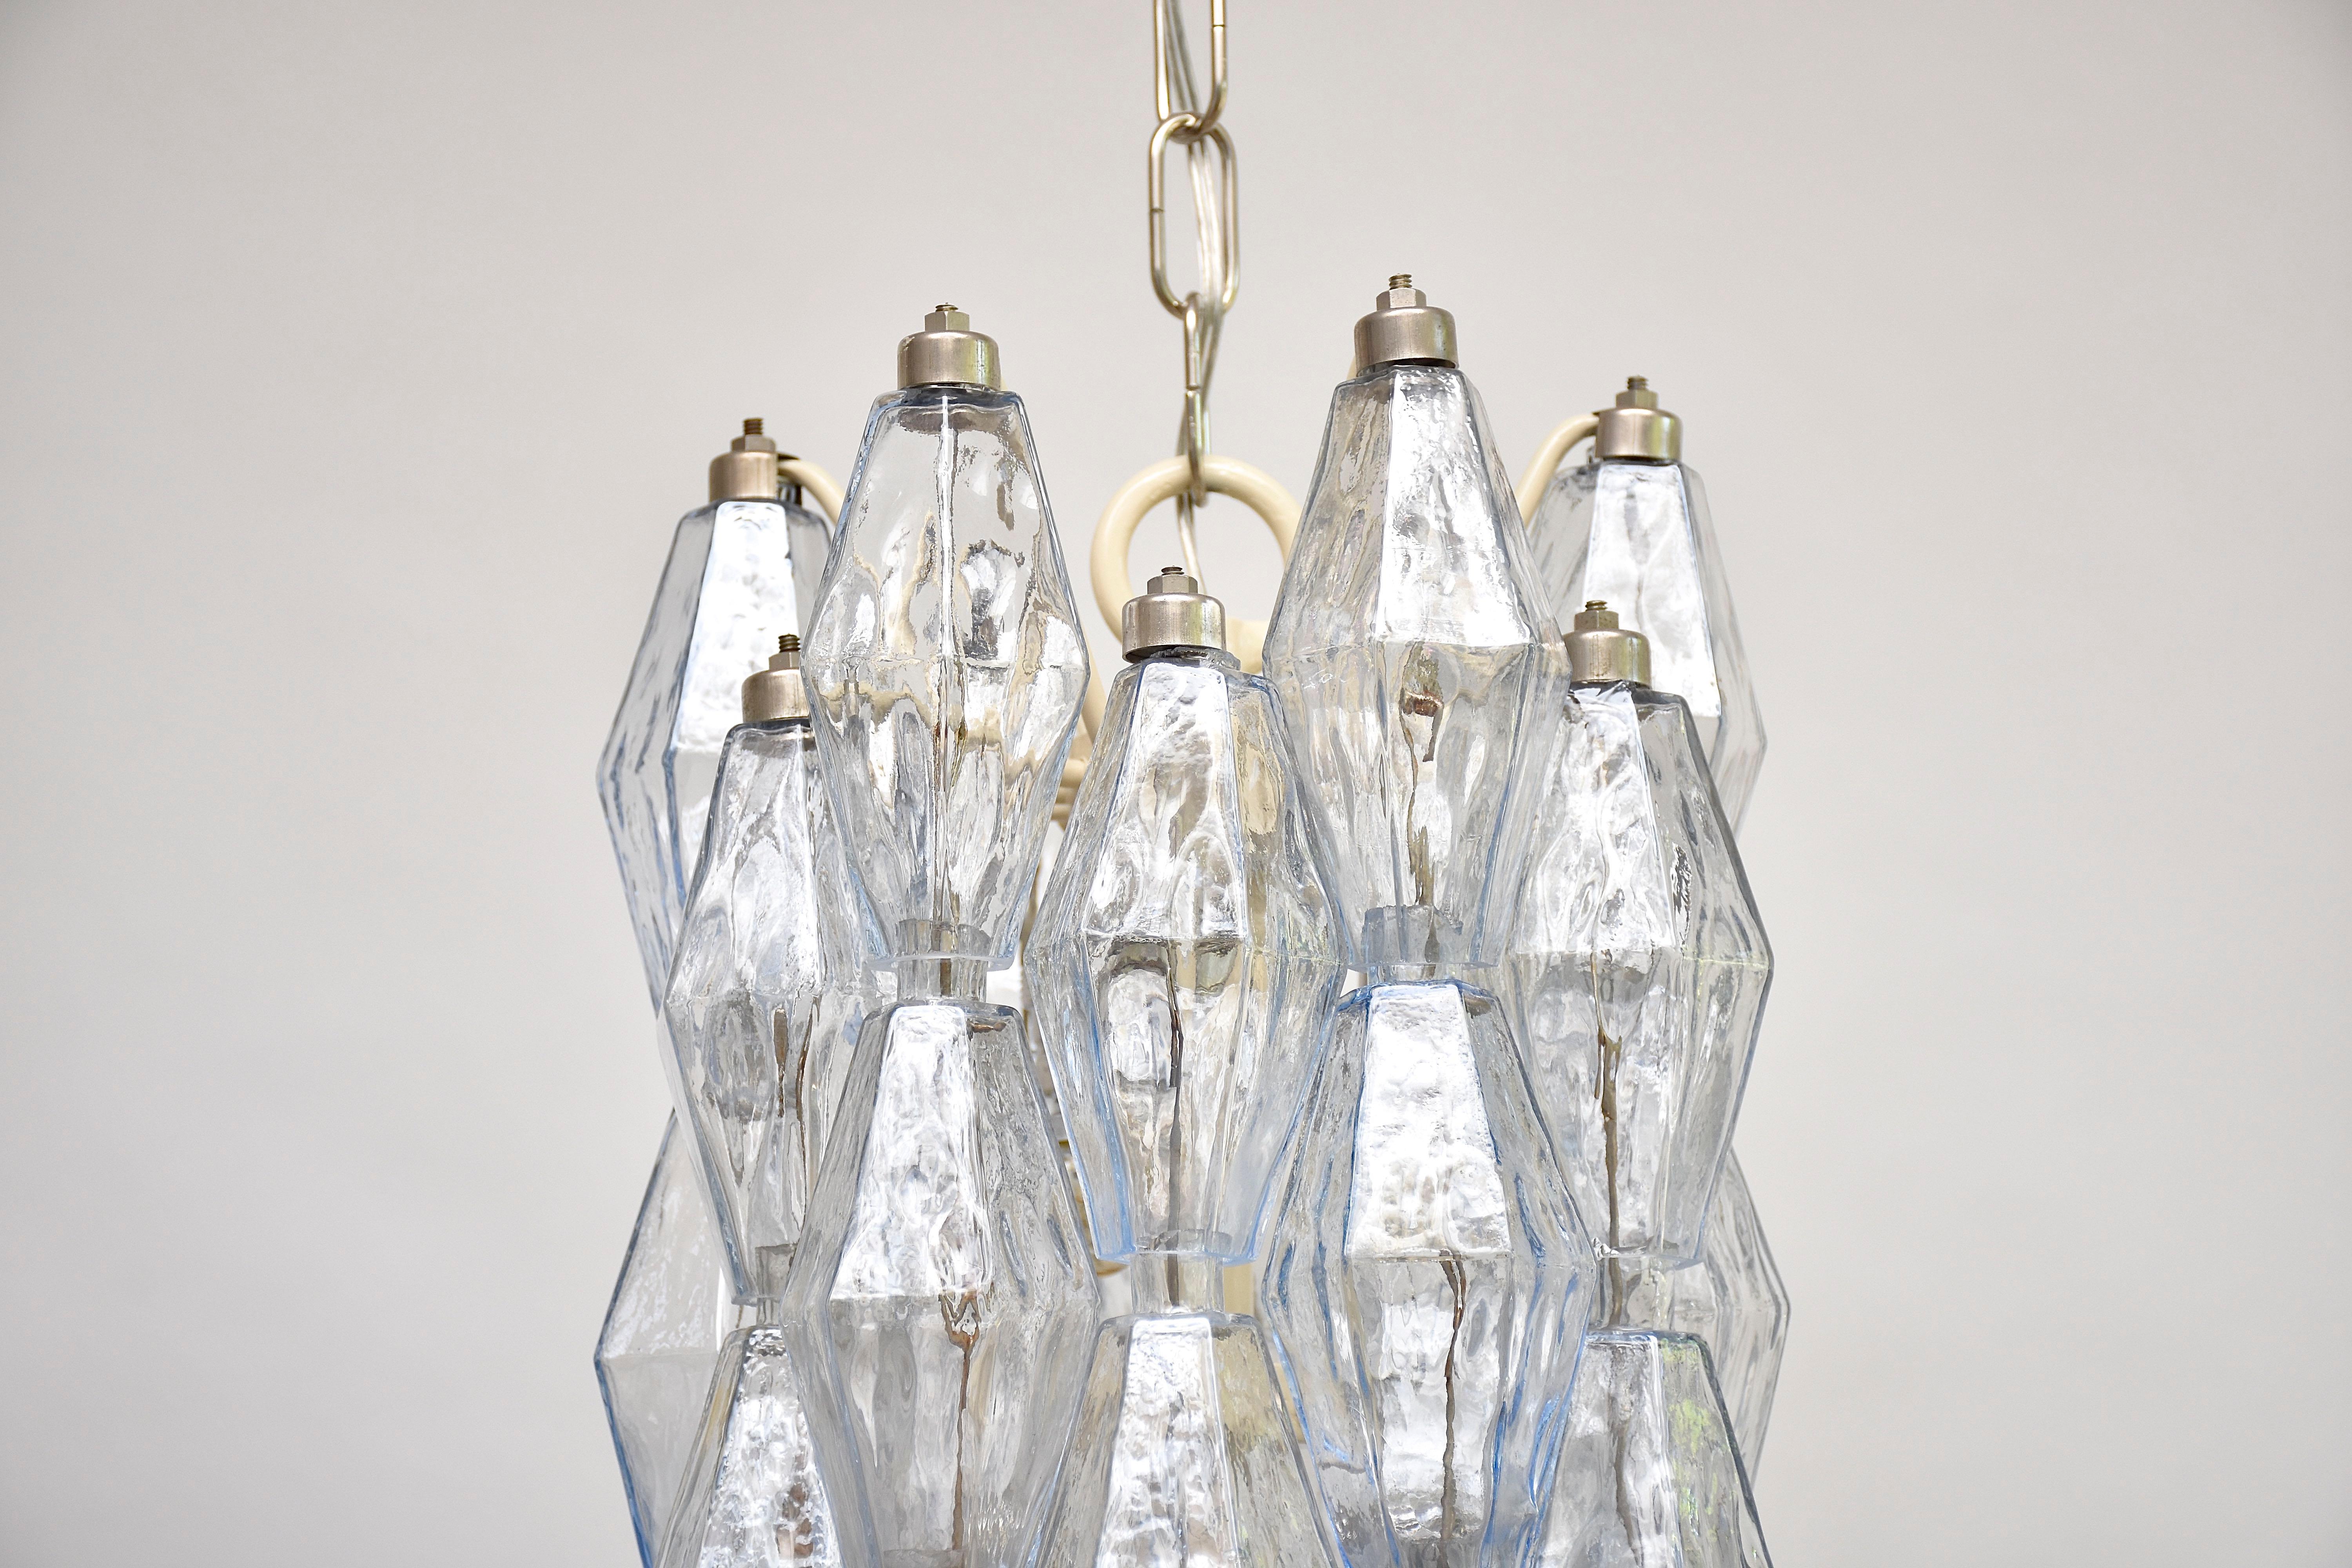 A very beautiful and original pair Murano chandeliers designed by Italian architect and designer Carlo Scarpa for Venini Murano.
Each with 9 lights.
Beautiful design where the advanced technique is visible.
With soft blue slightly iridescent moulded